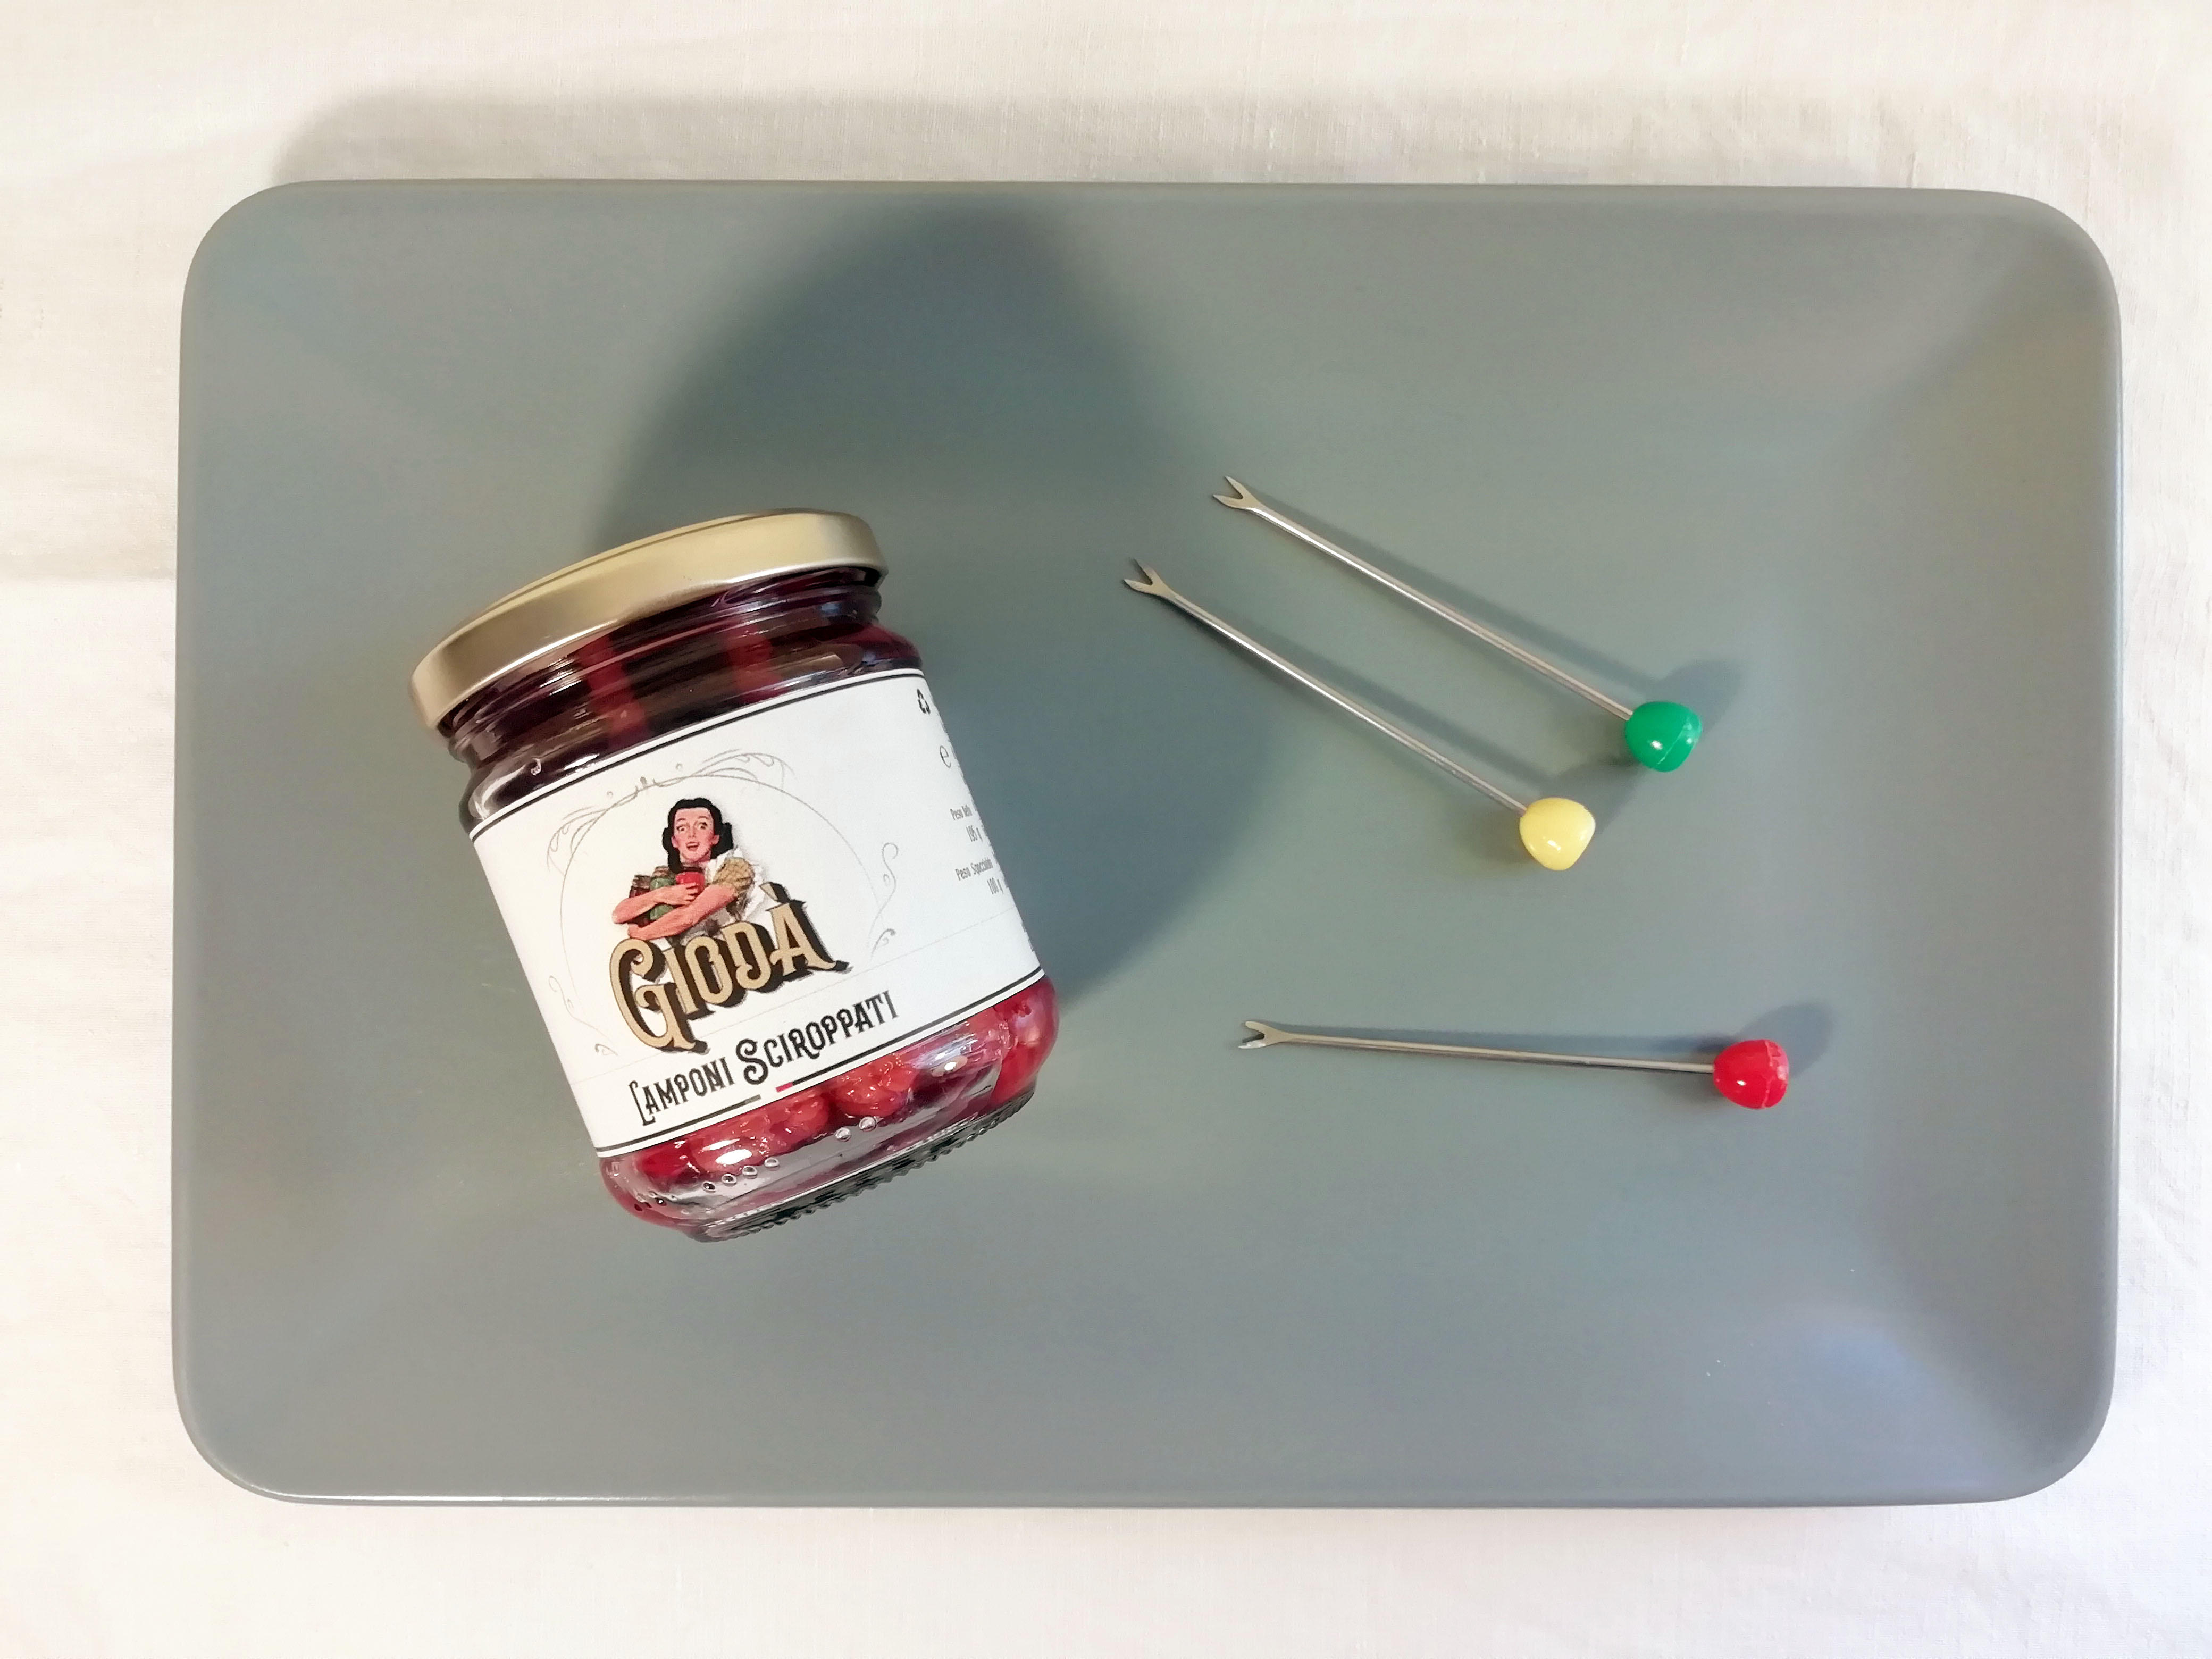 Lamponi sciroppati - Raspberries in syrup